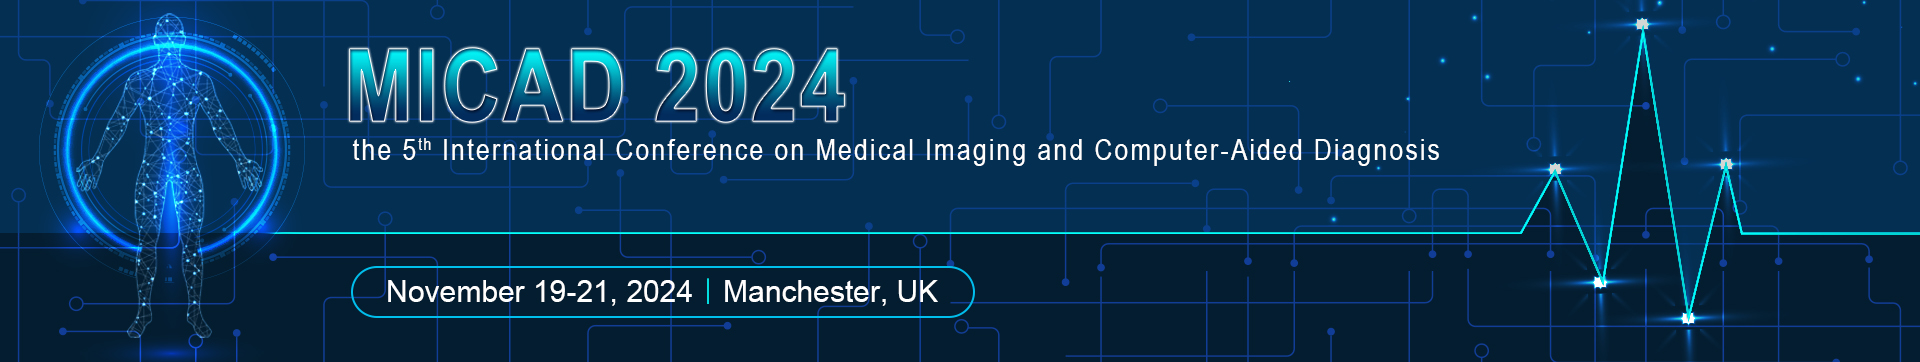 5th International Conference on Medical Imaging and Computer-Aided Diagnosis